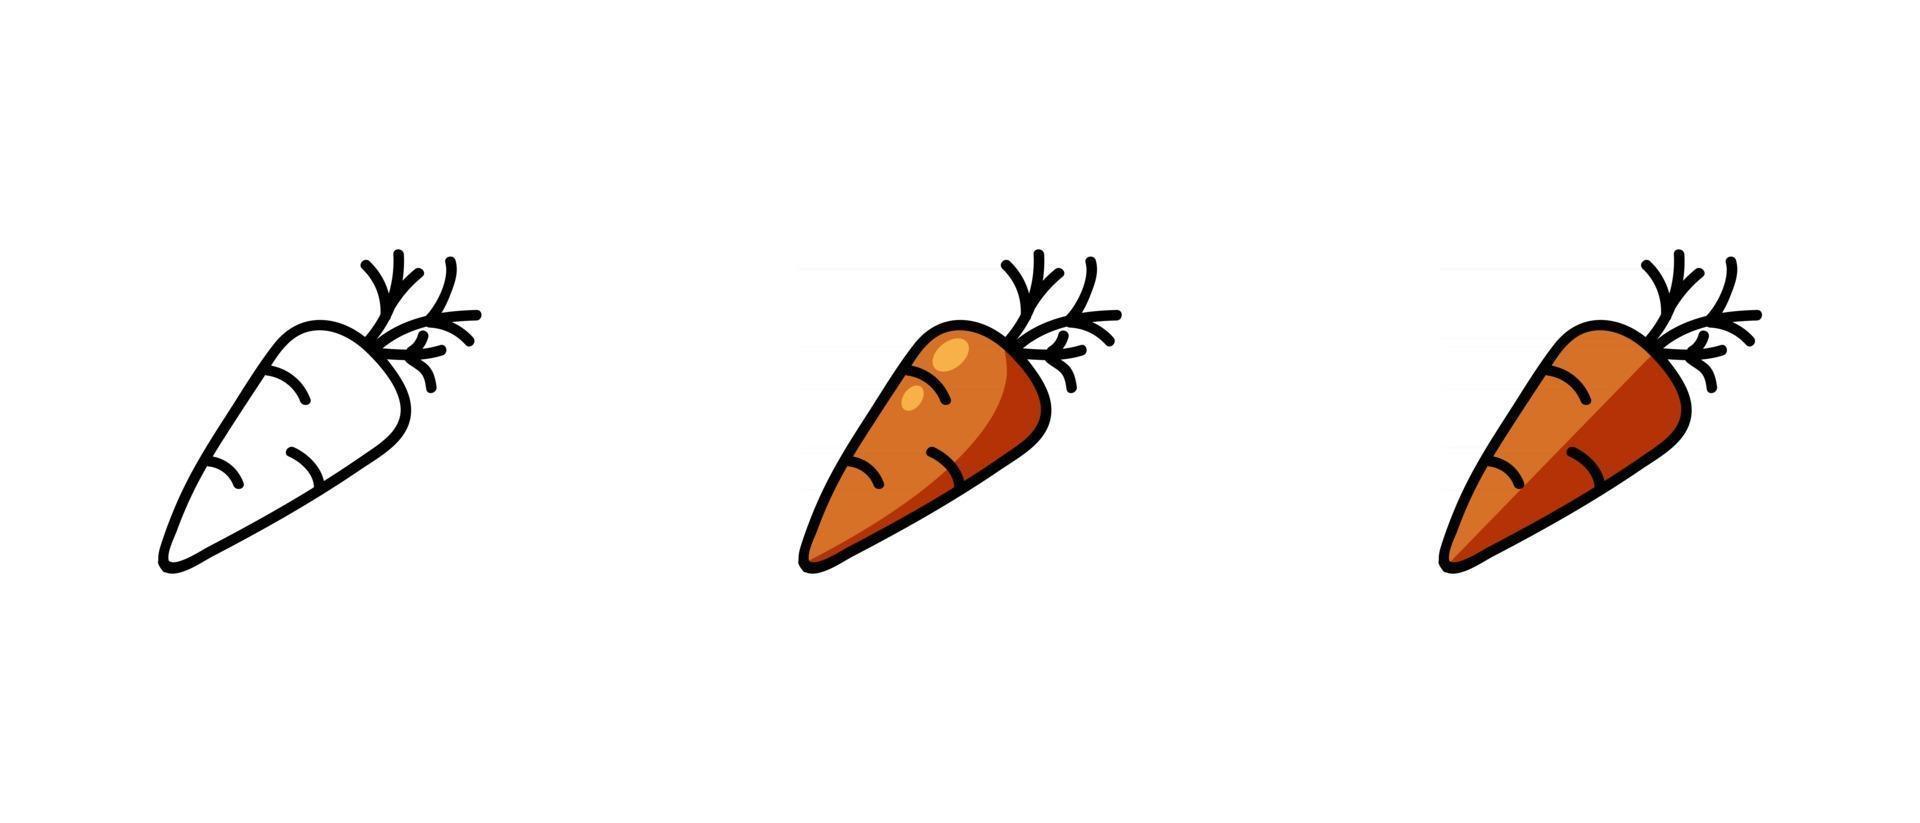 Contour and colored symbols of carrots vector